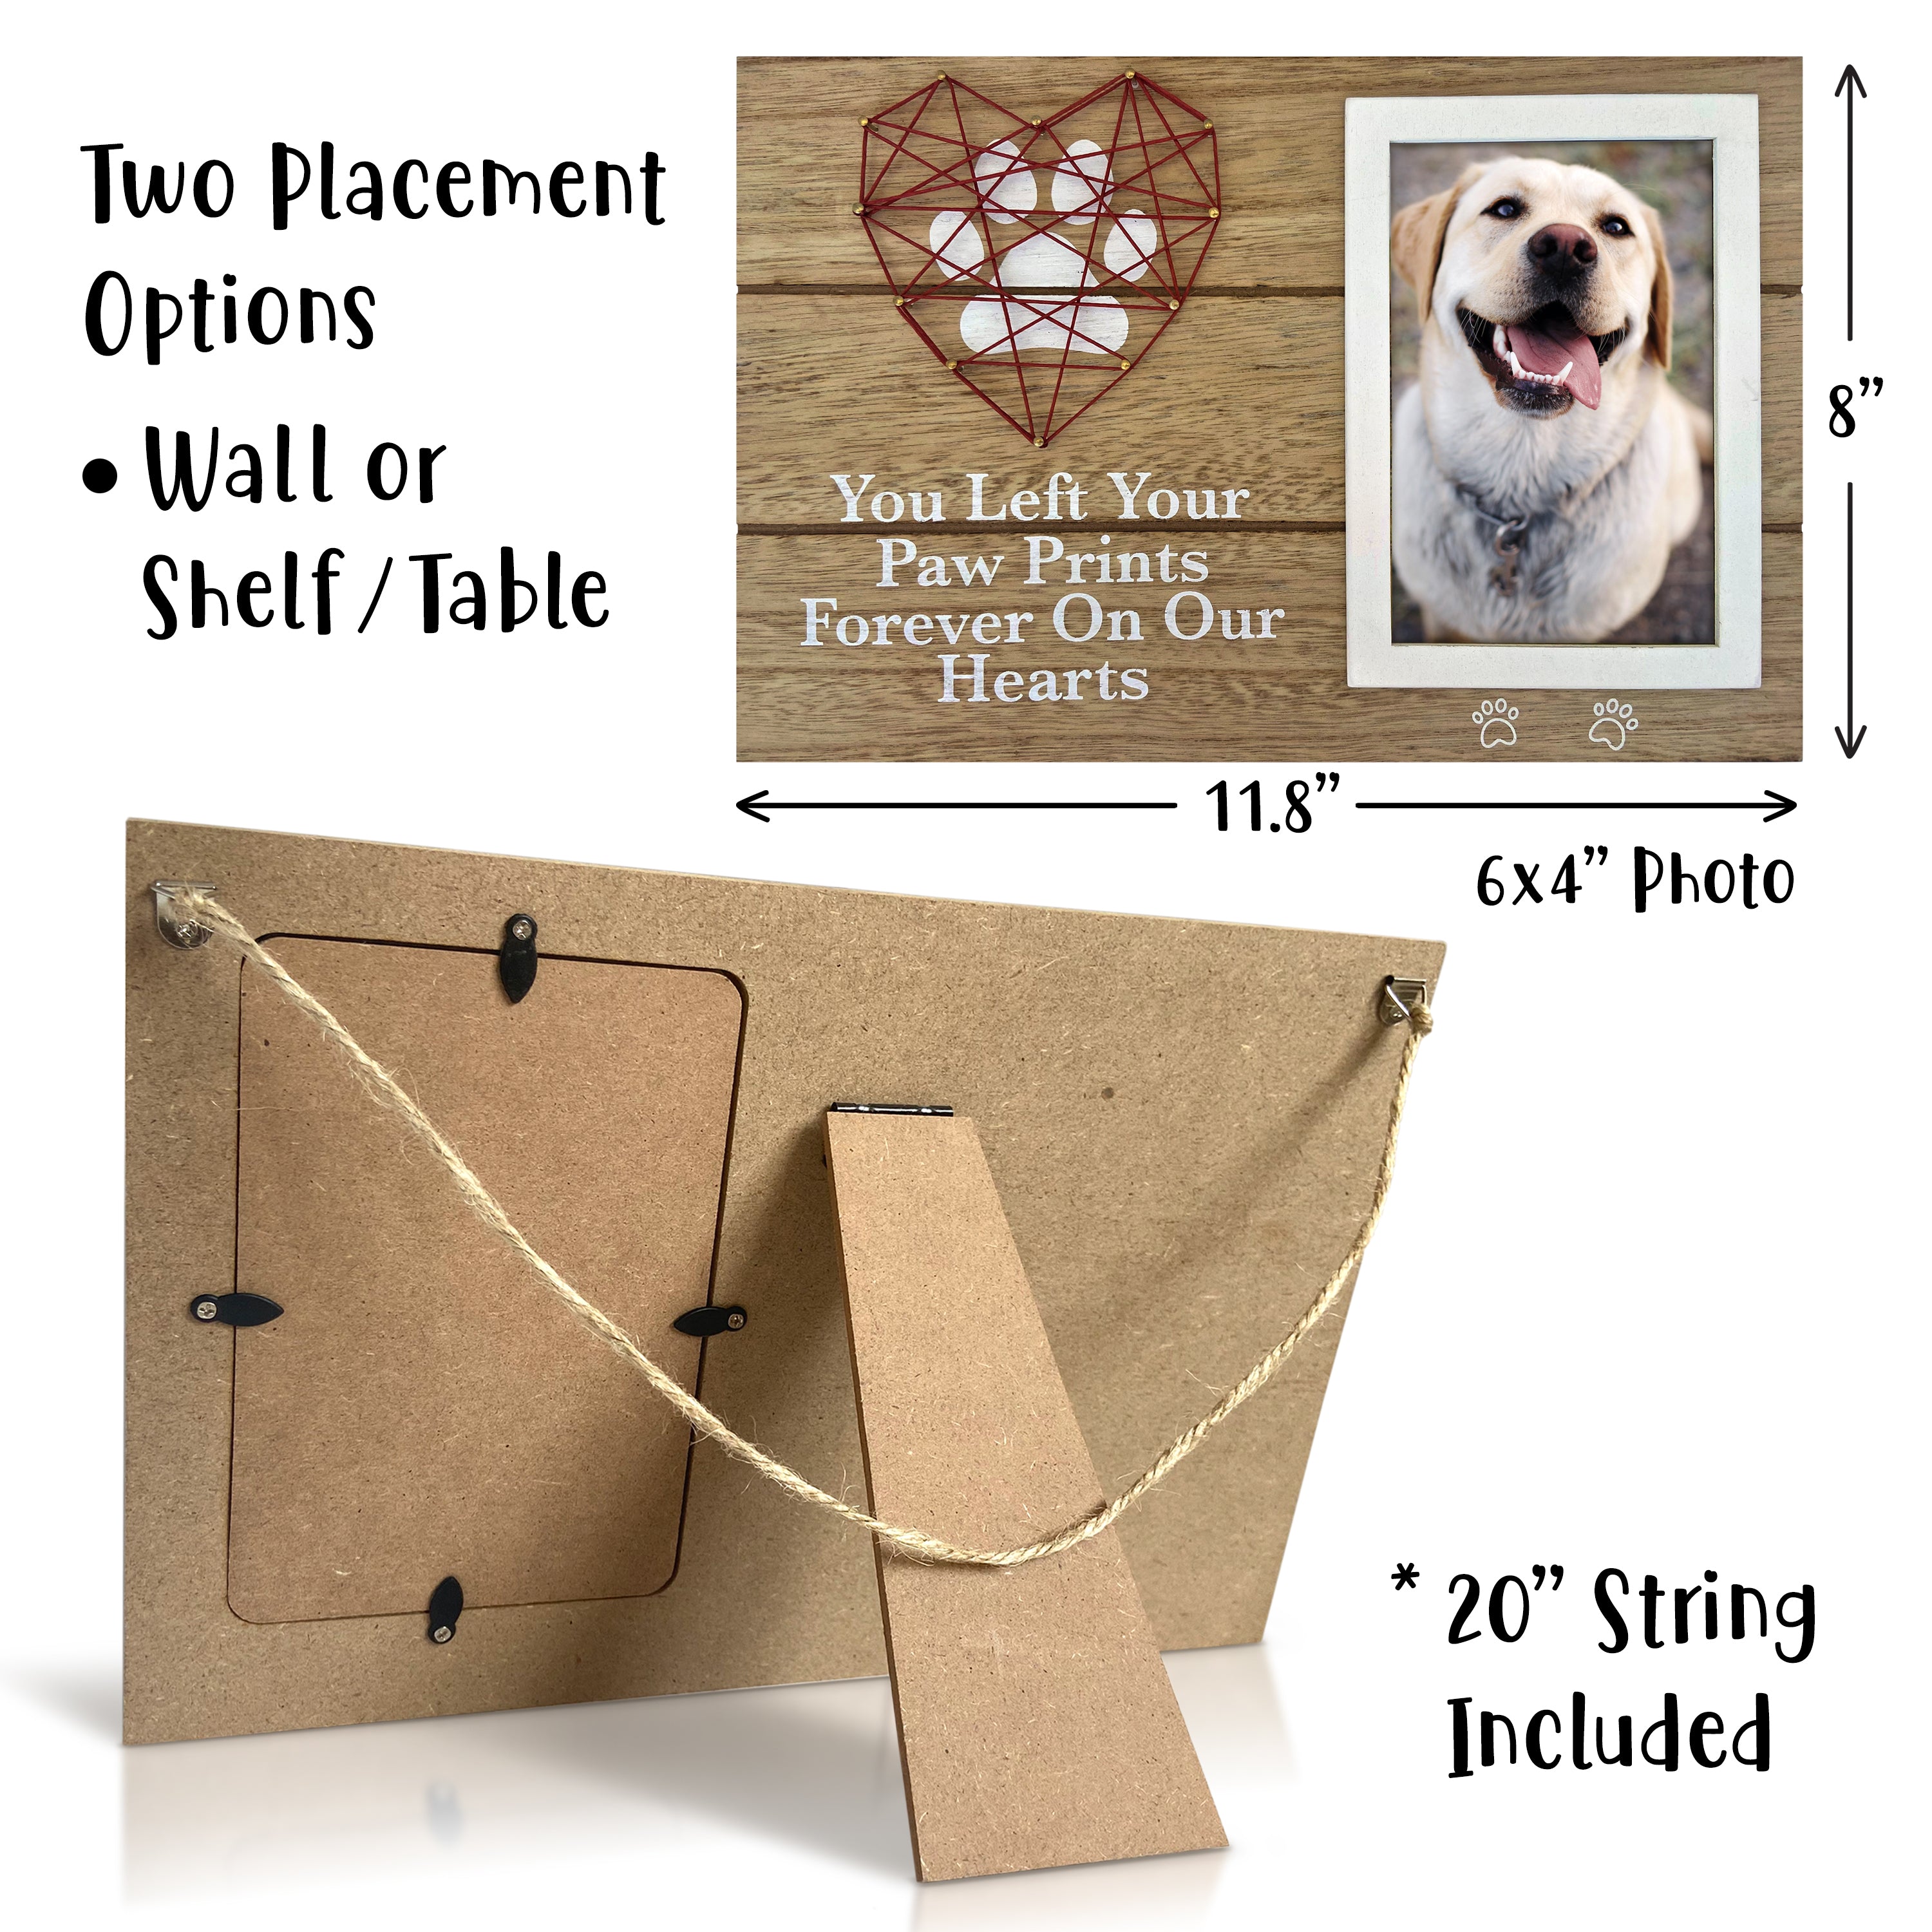 4"x6" Pet Memorial Picture Frame with Paw Prints & Woven Heart Design